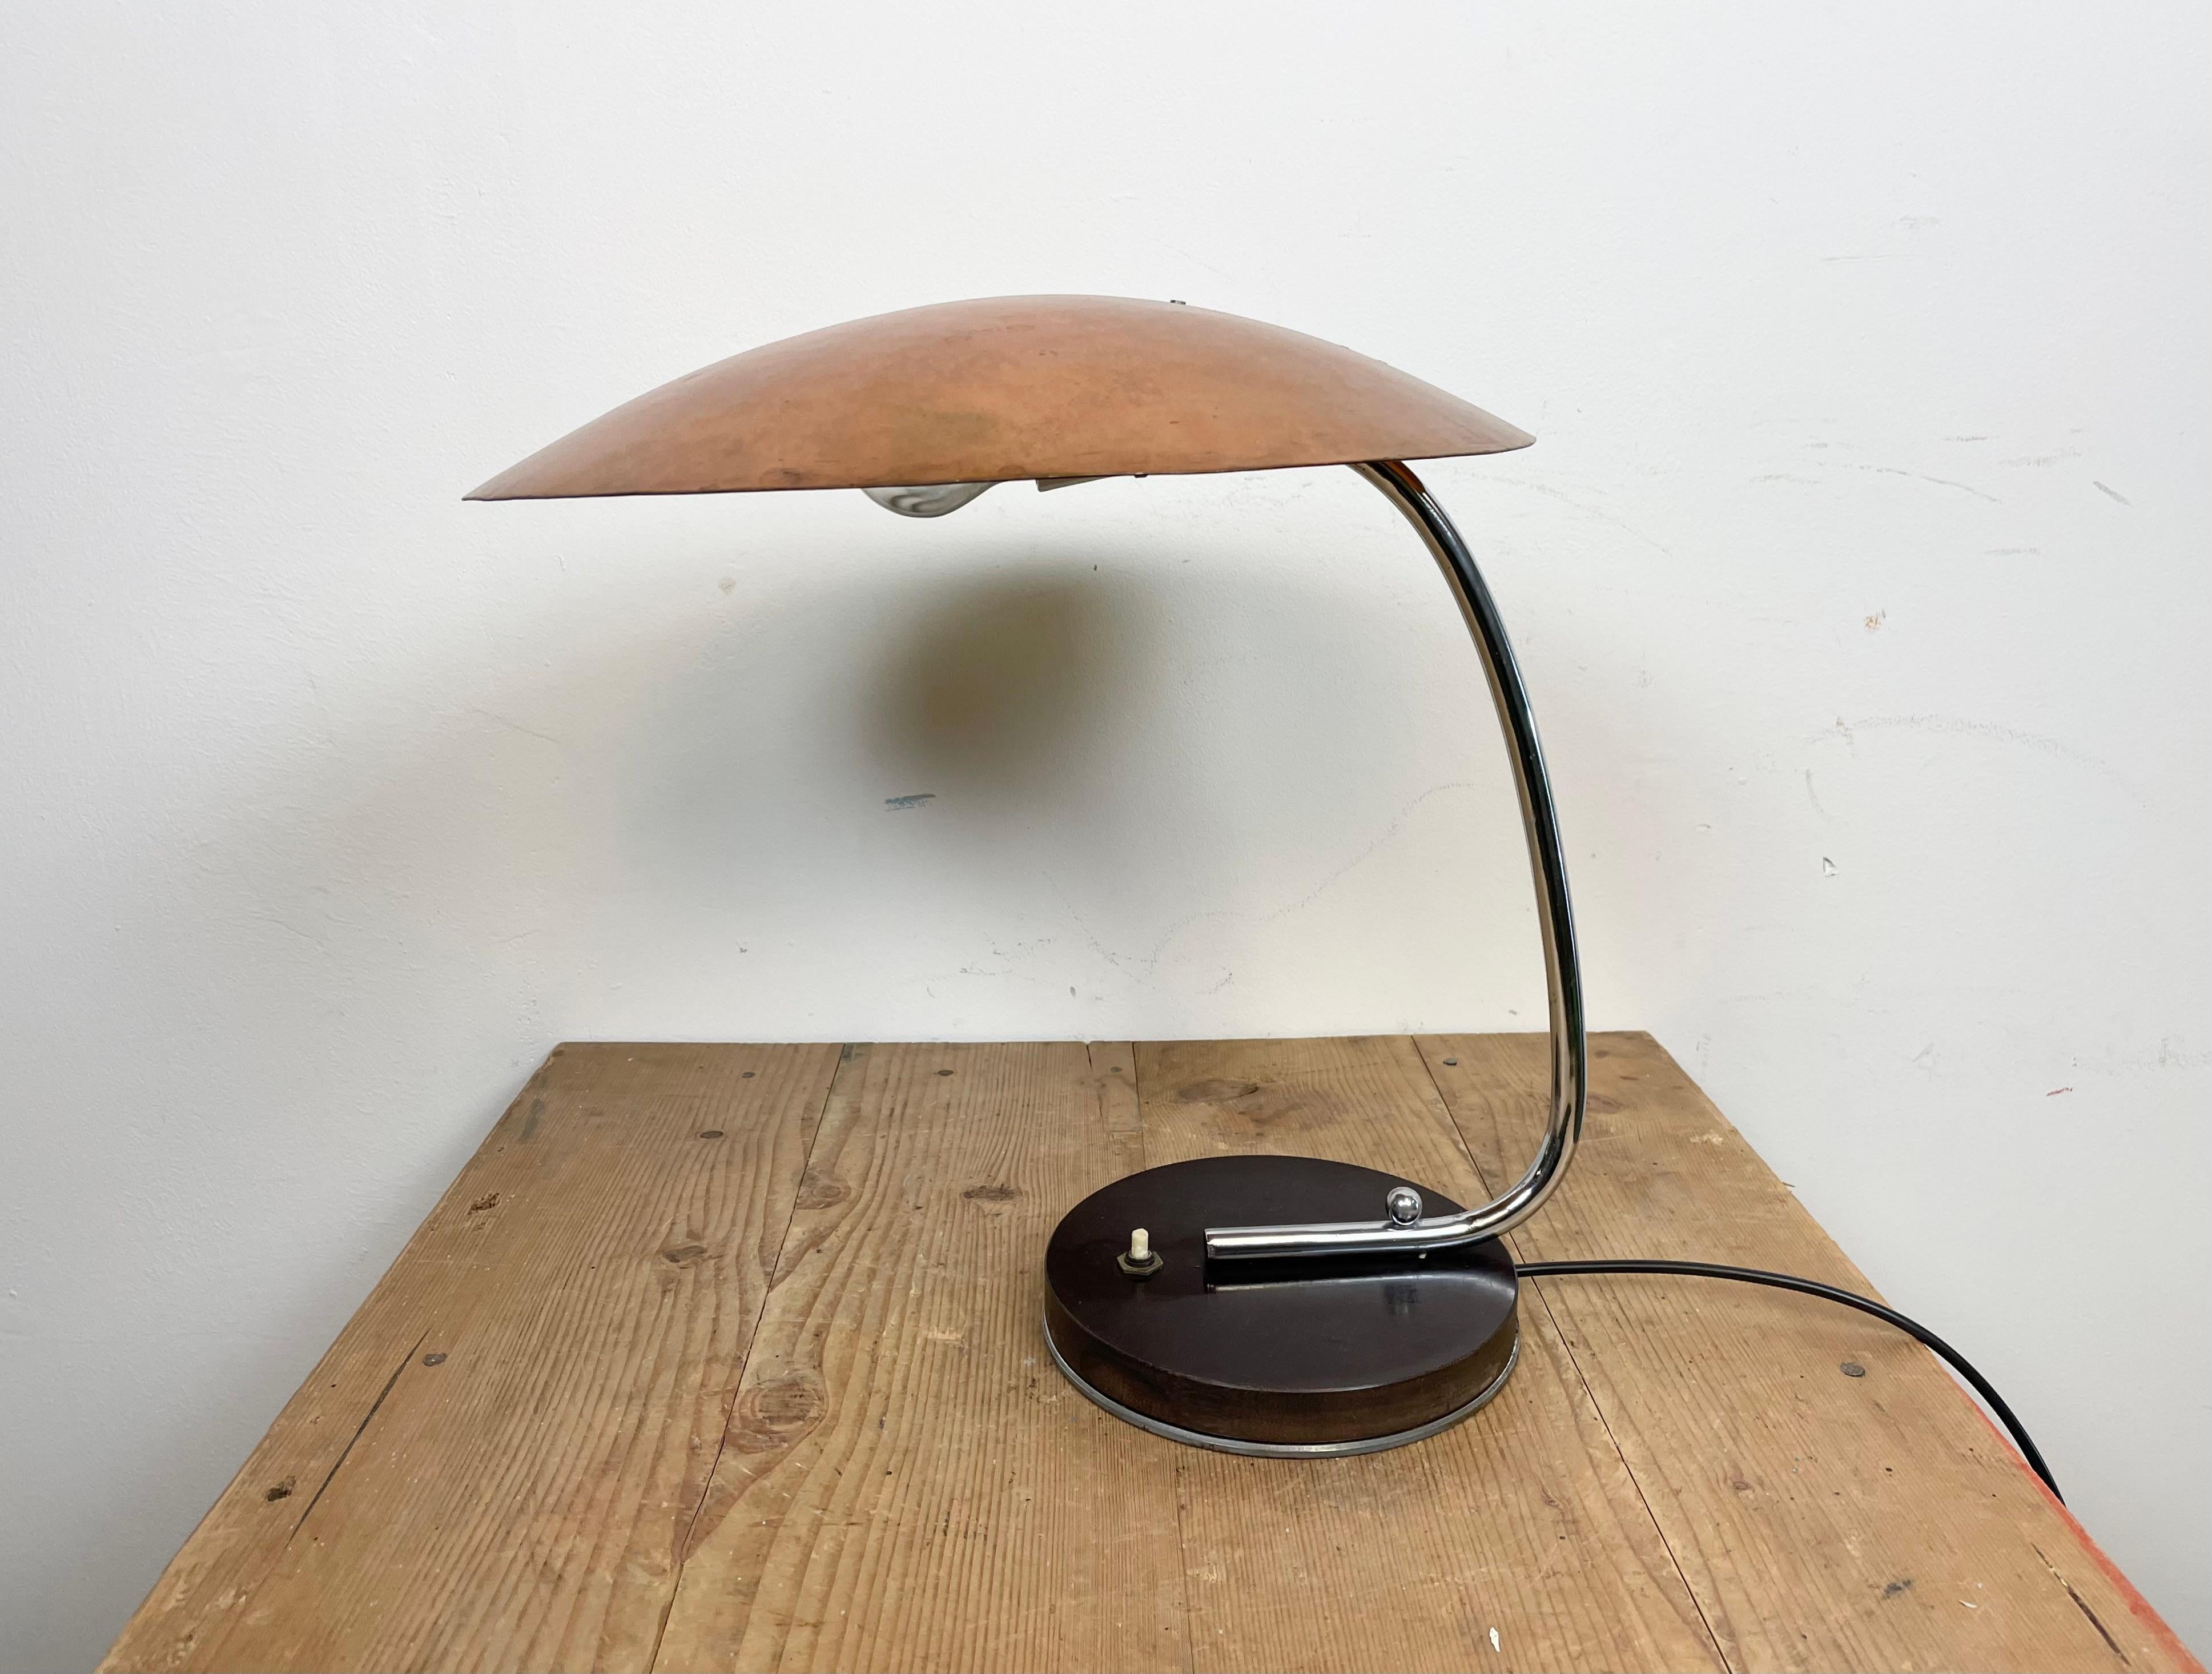 This vintage table lamp was produced in former Czechoslovakia during the 1970s. It features a brass lampshade, a chrome plated arm and a bakelite base with switch. The original socket requires standard E 27/ E 26 light bulbs. Good vintage